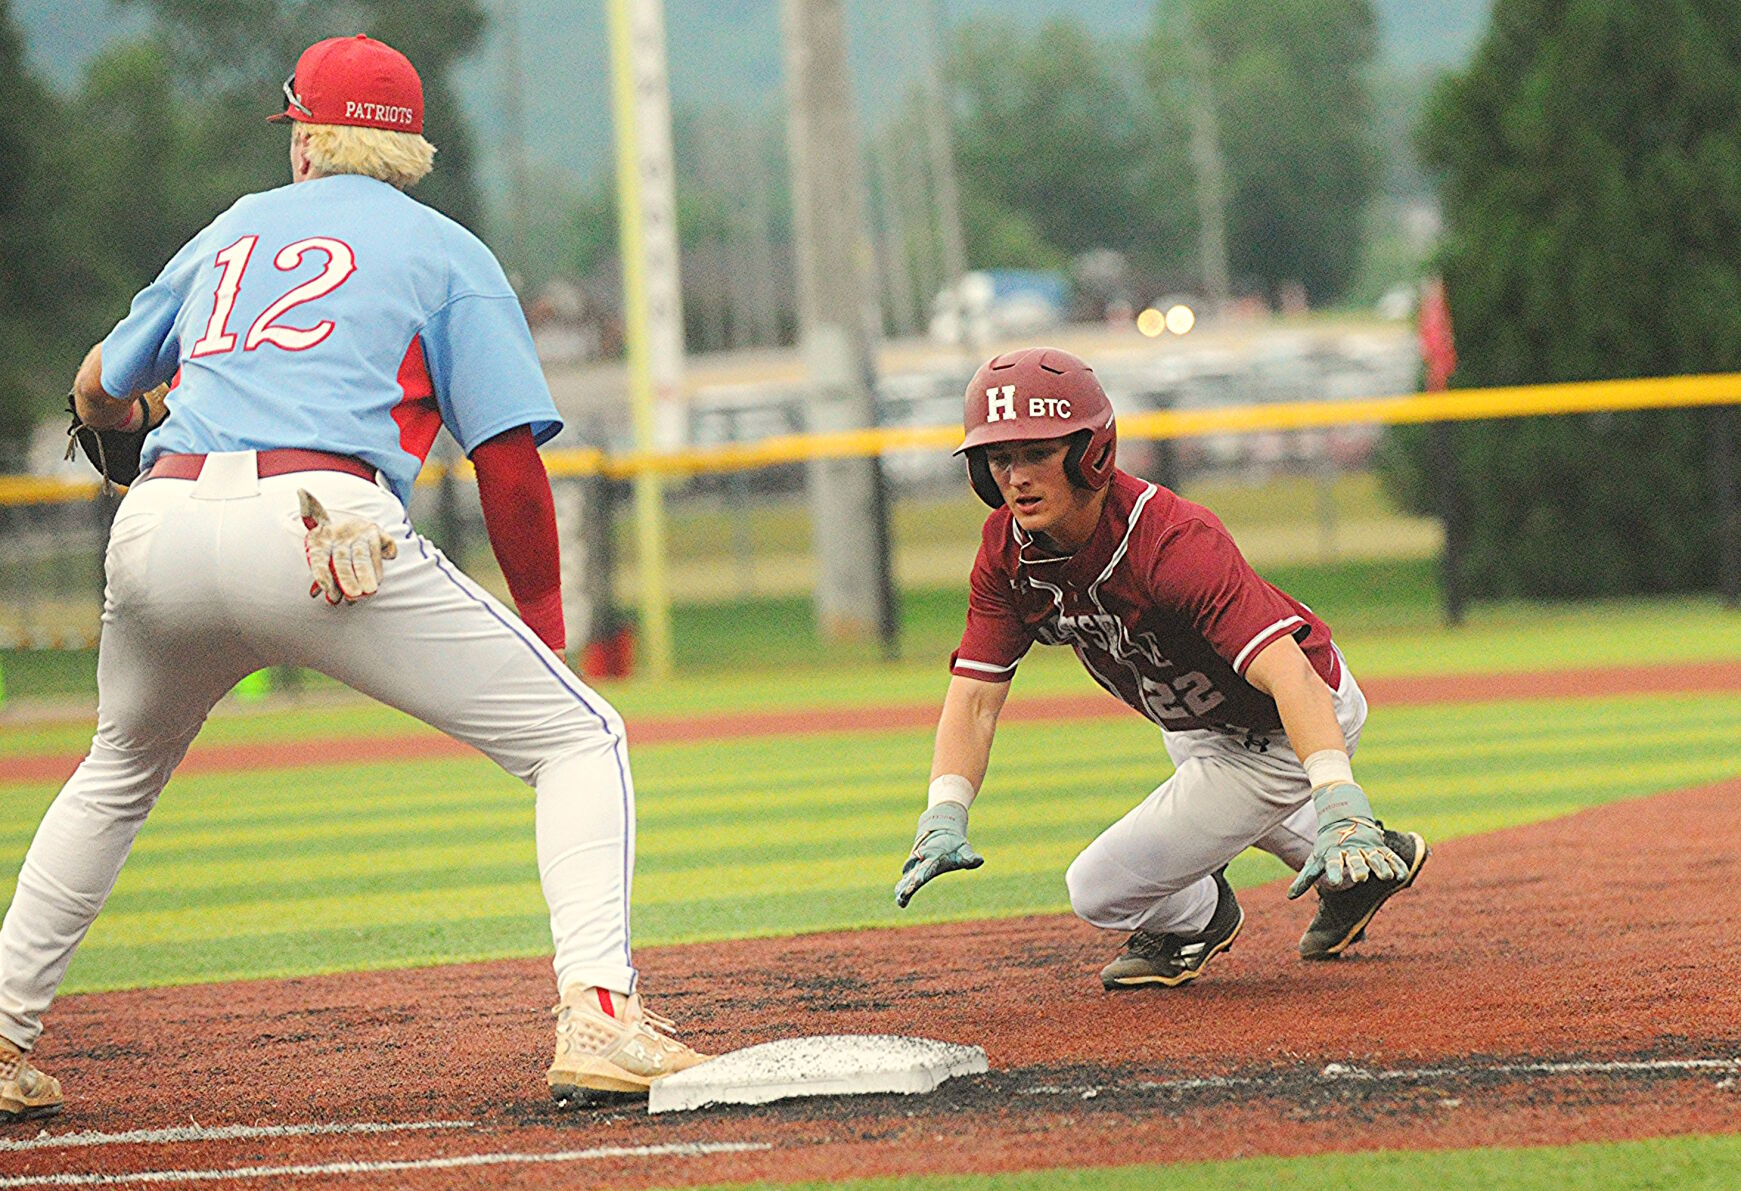 Hartselle Baseball: State Finals Heartbreak as Tigers Lose in Game 3 Thriller